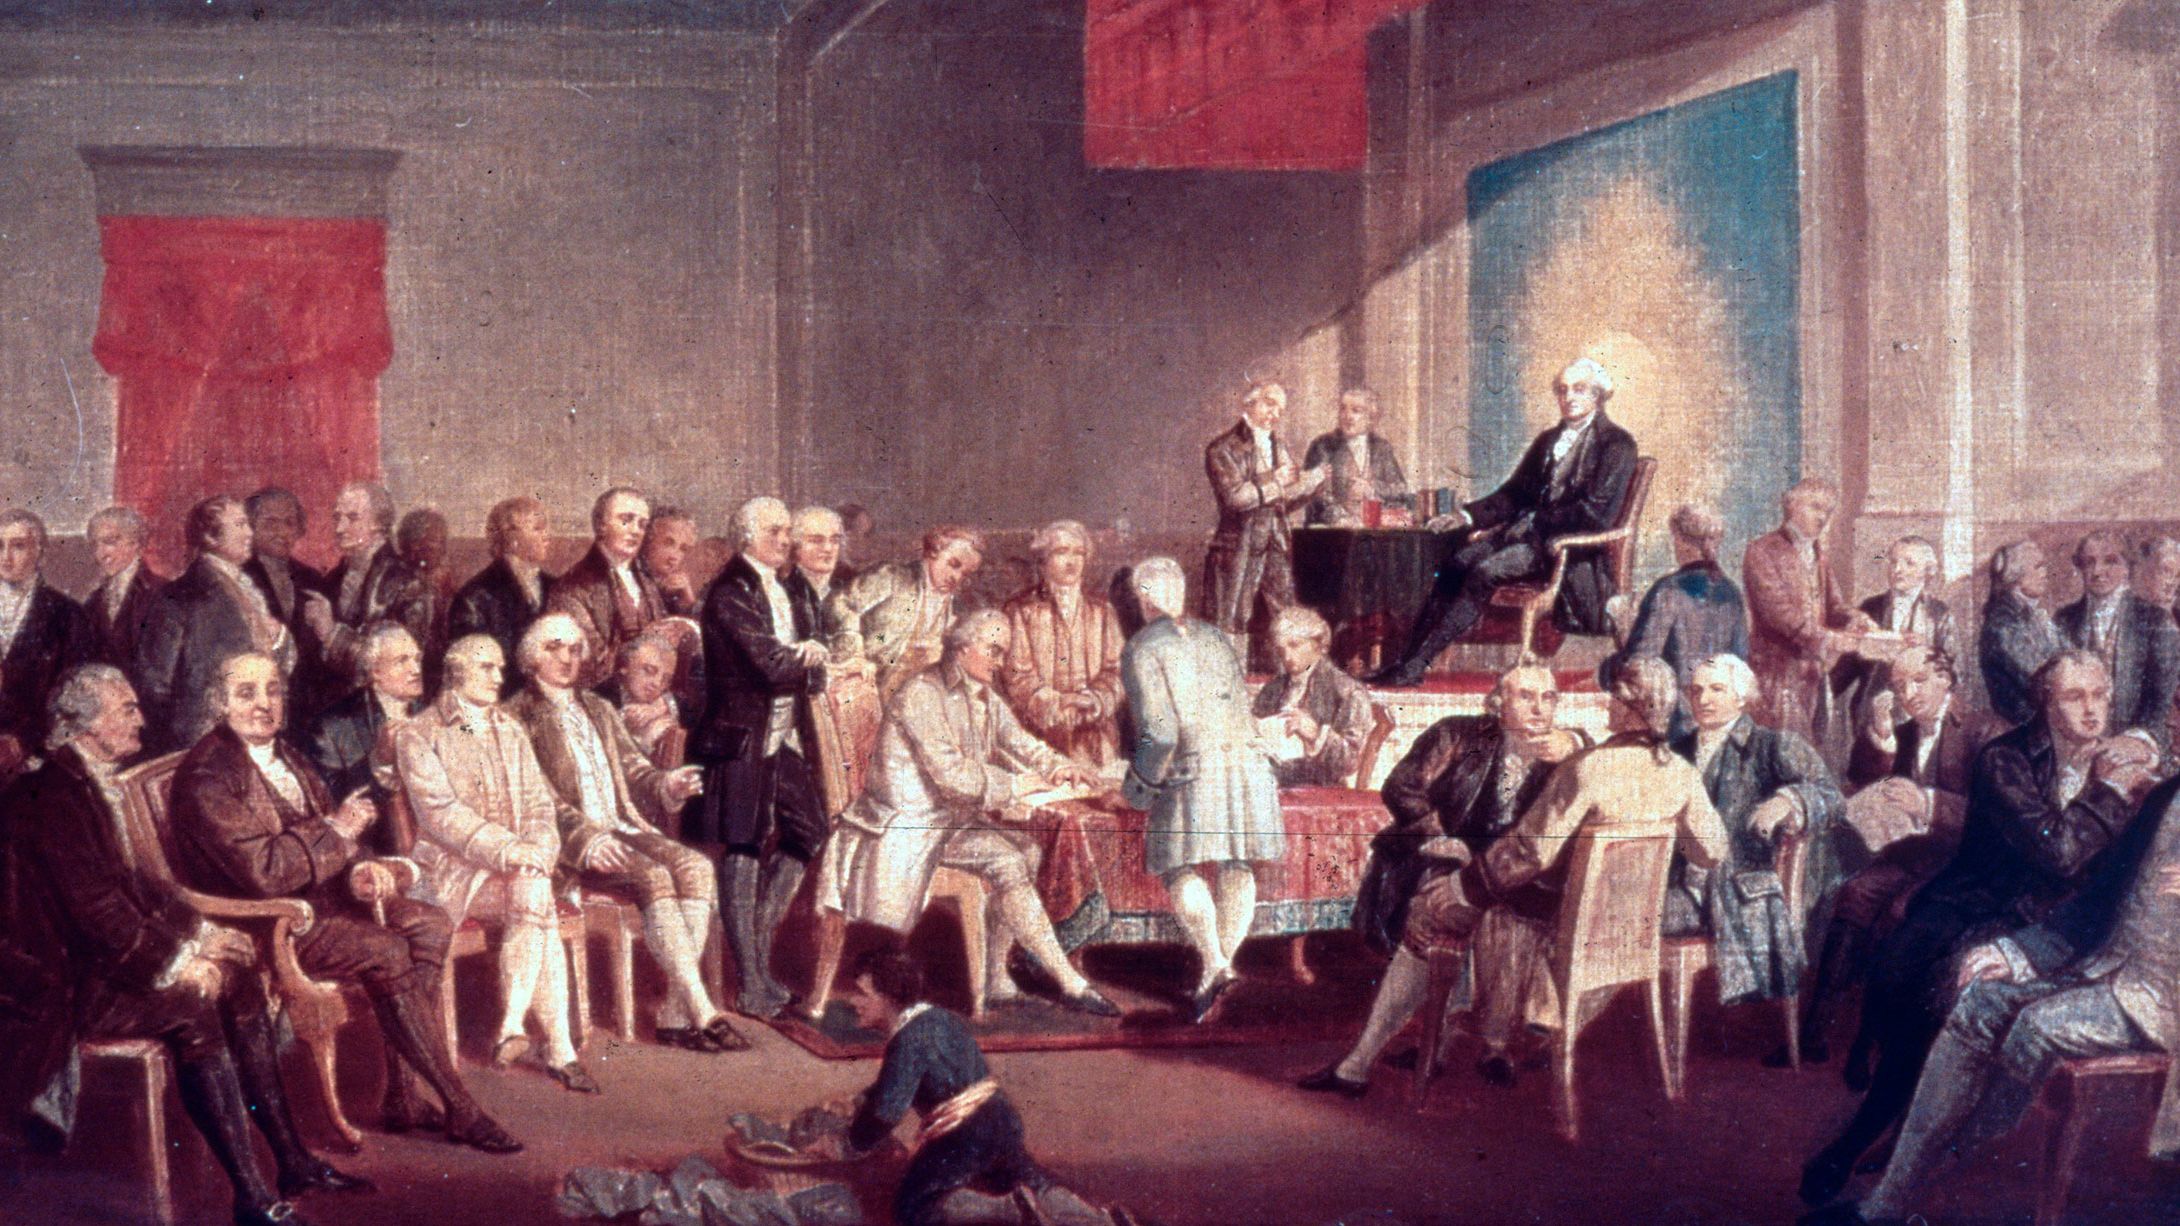 This painting chronicles lawmakers' signing of the Constitution of the United States in 1787. 